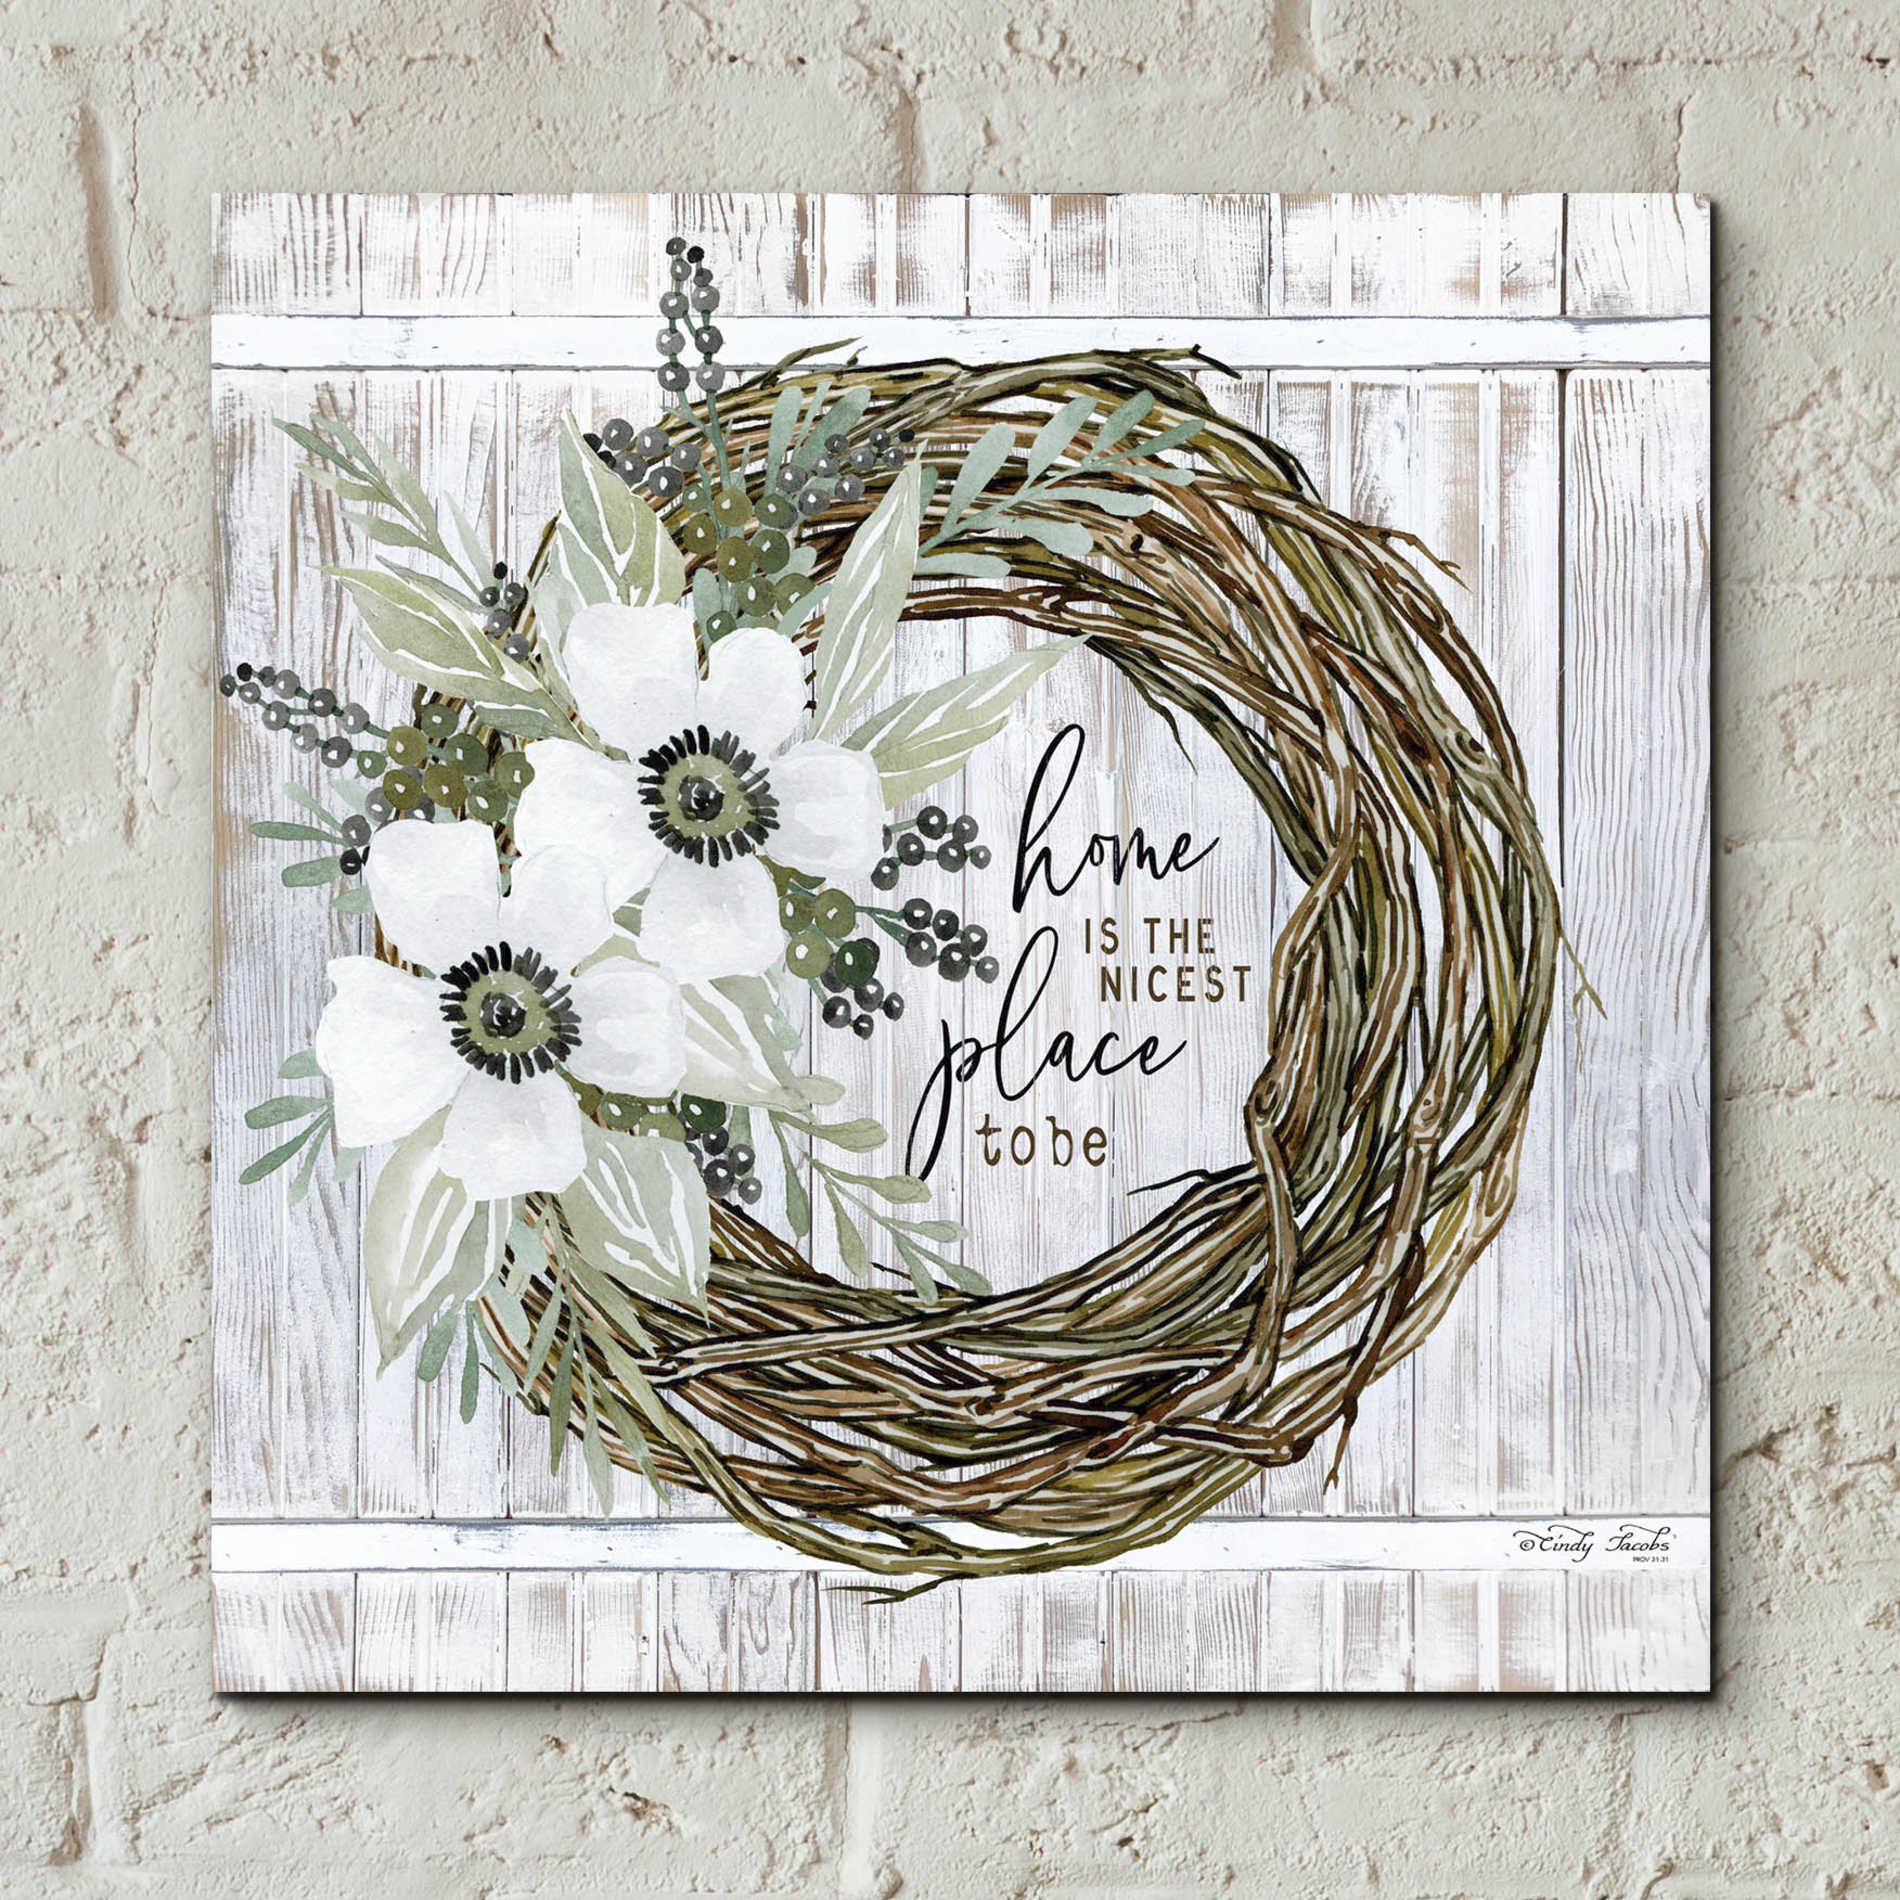 Epic Art 'Home is the Nicest Place to Be Wreath' by Cindy Jacobs, Acrylic Glass Wall Art,12x12